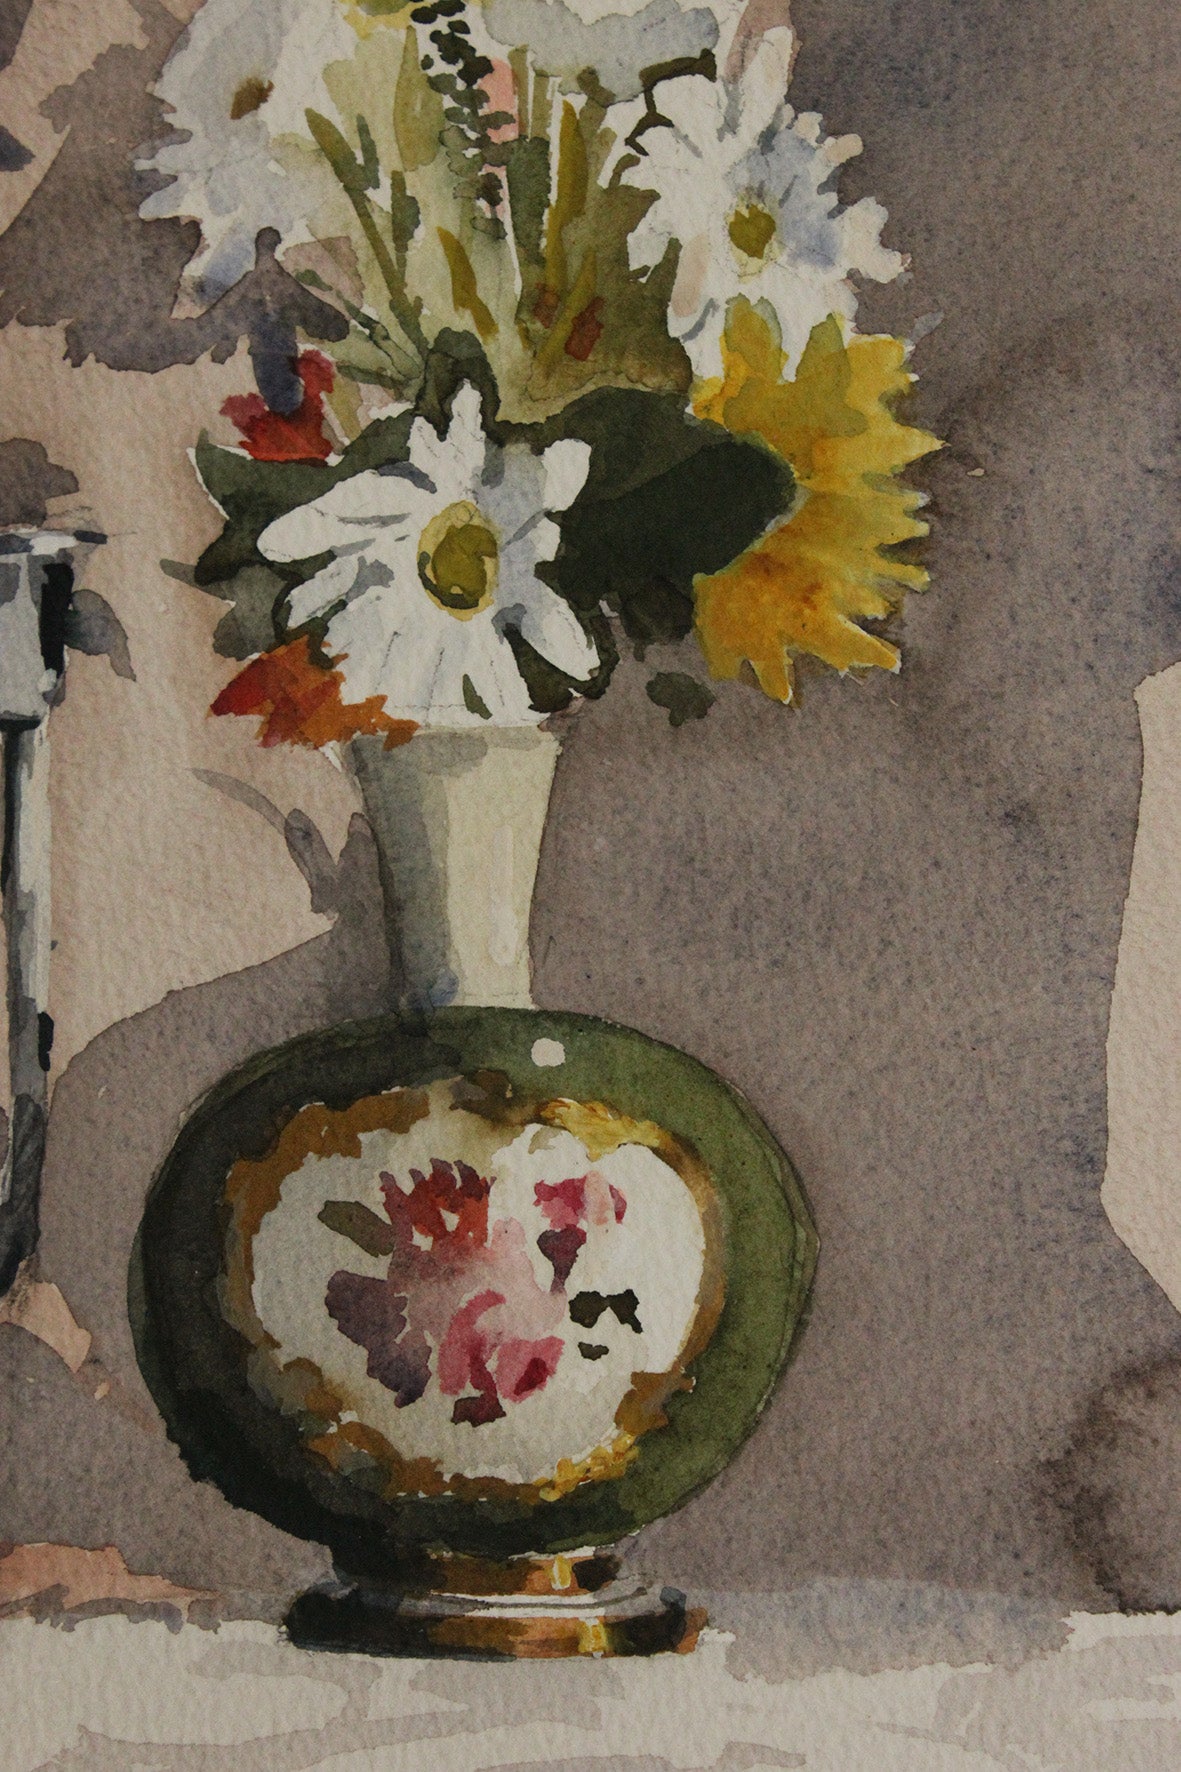 Vintage Still Life Watercolour - one